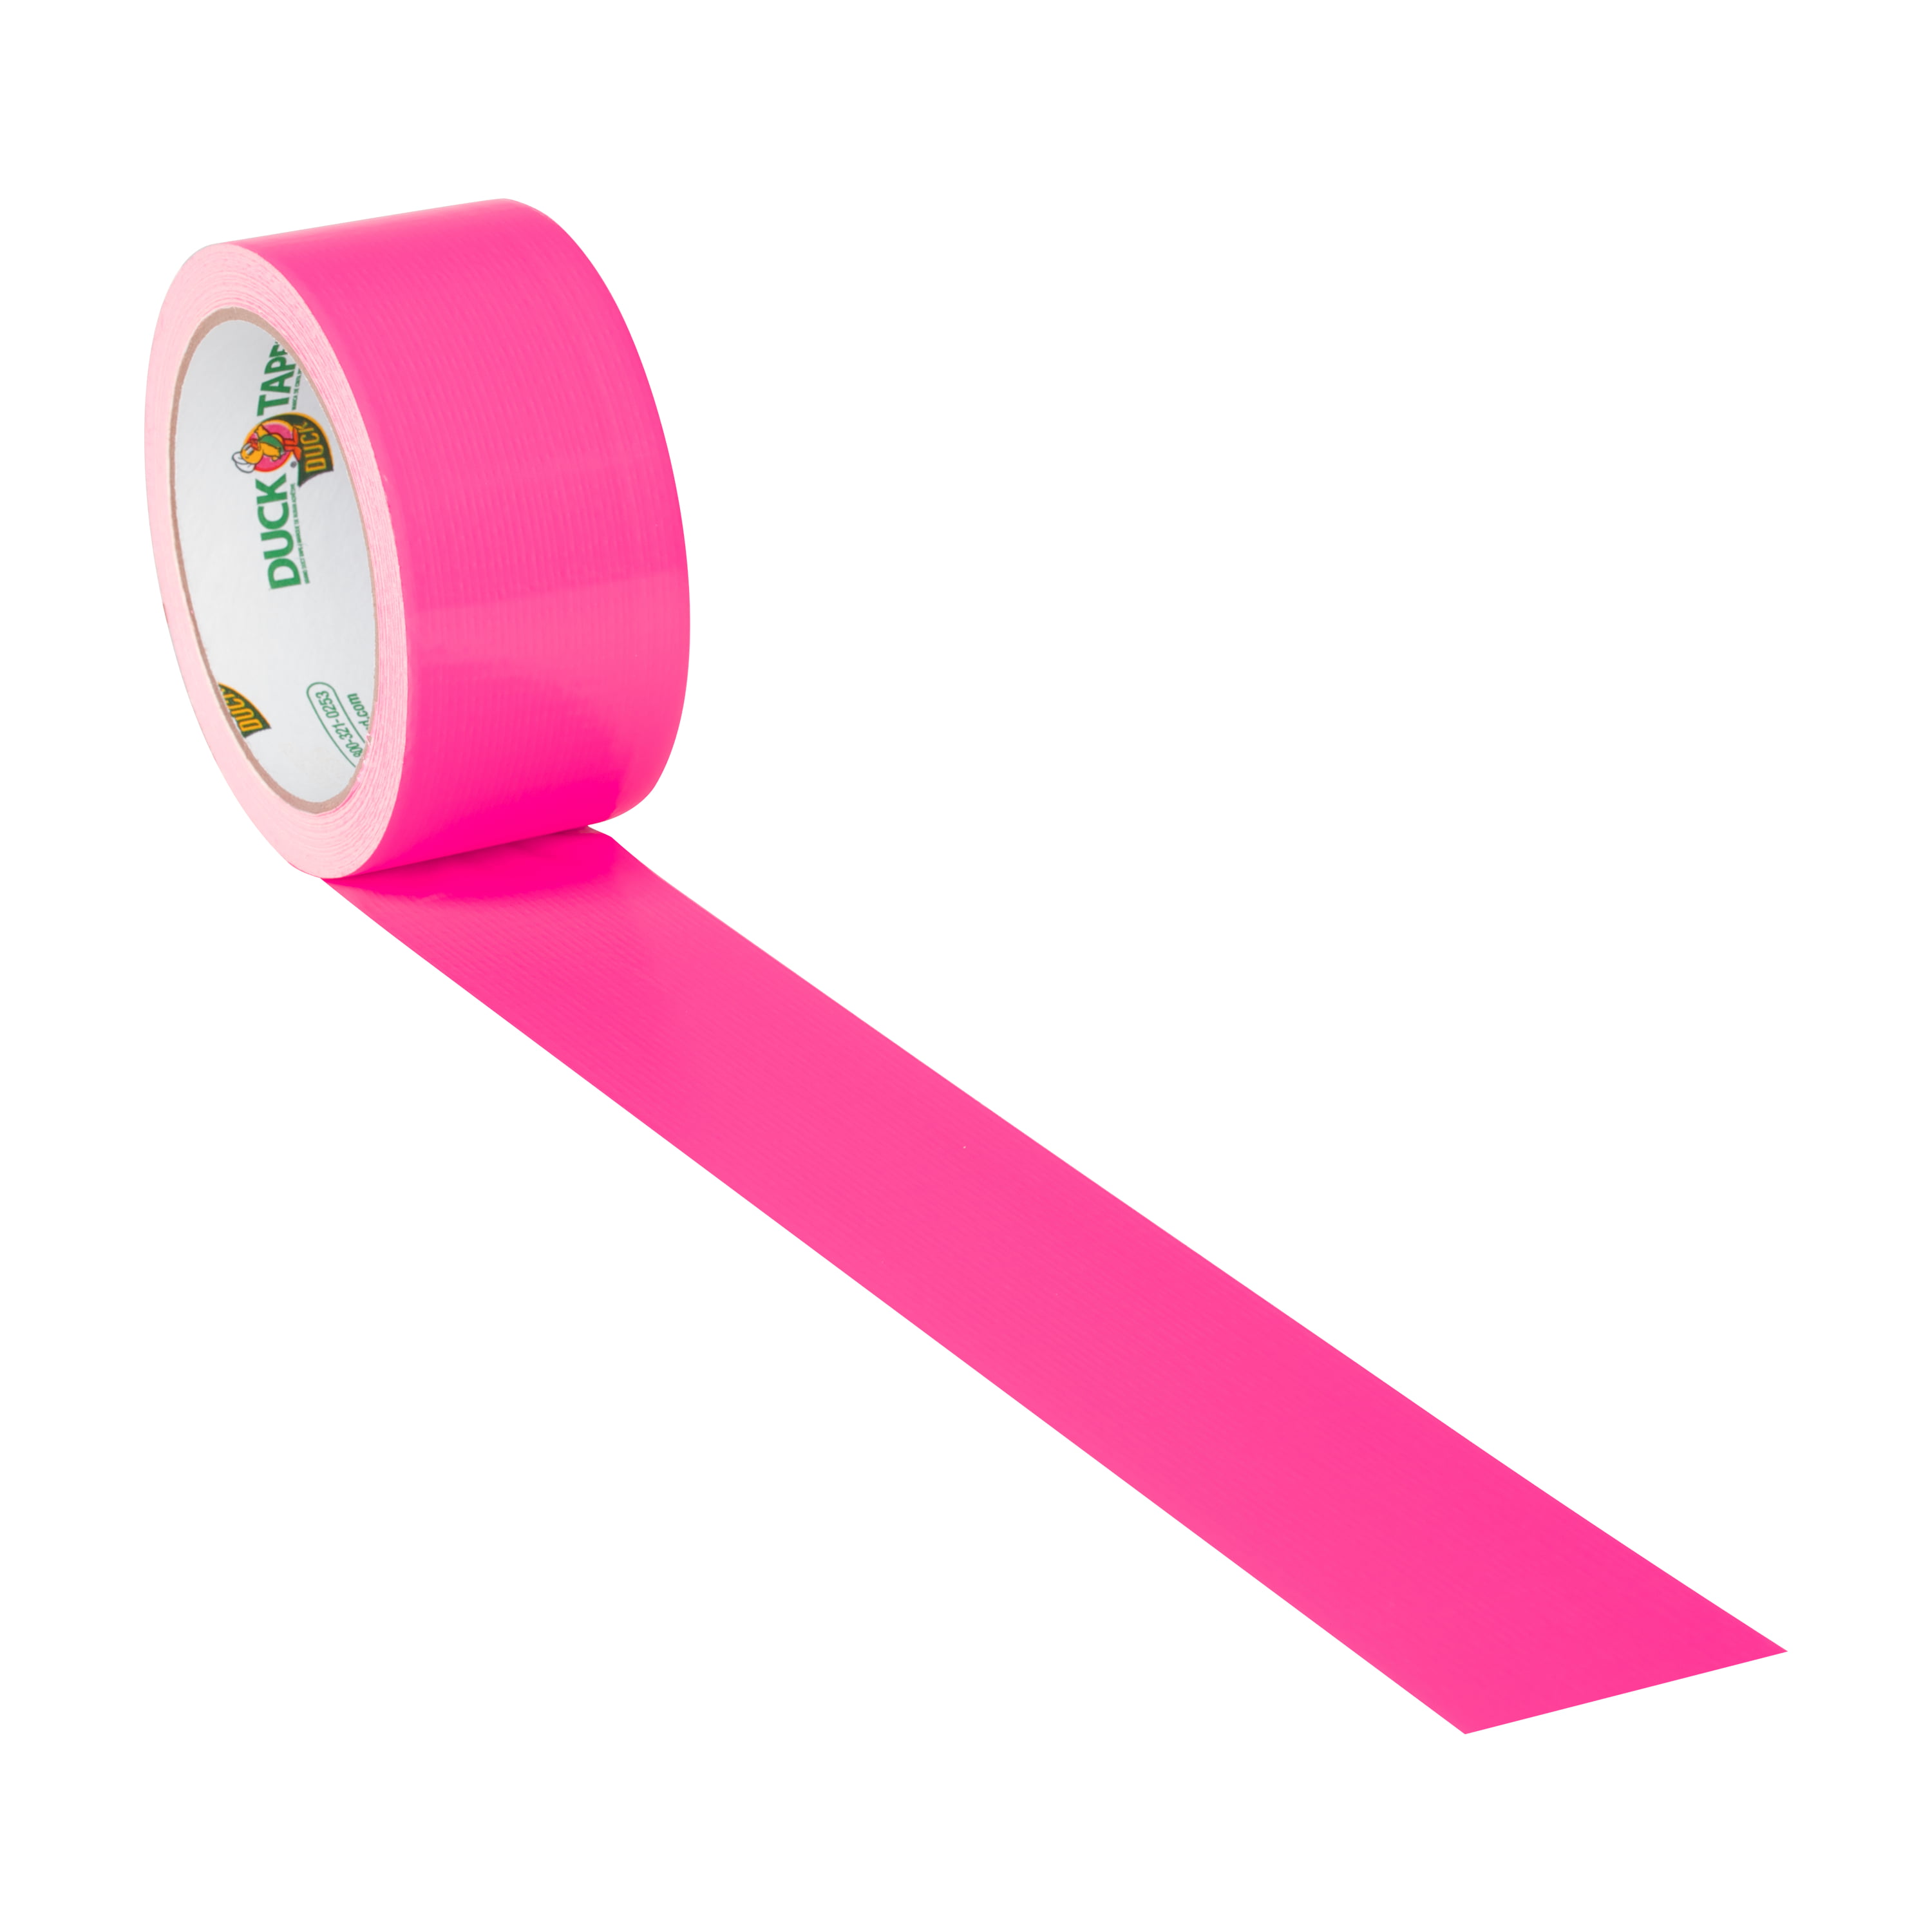 Wod DTC12 Contractor Grade Fluorescent Pink Duct Tape 12 mil, 1 inch x 60 yds. Waterproof, UV Resistant for Crafts & Home Improvement